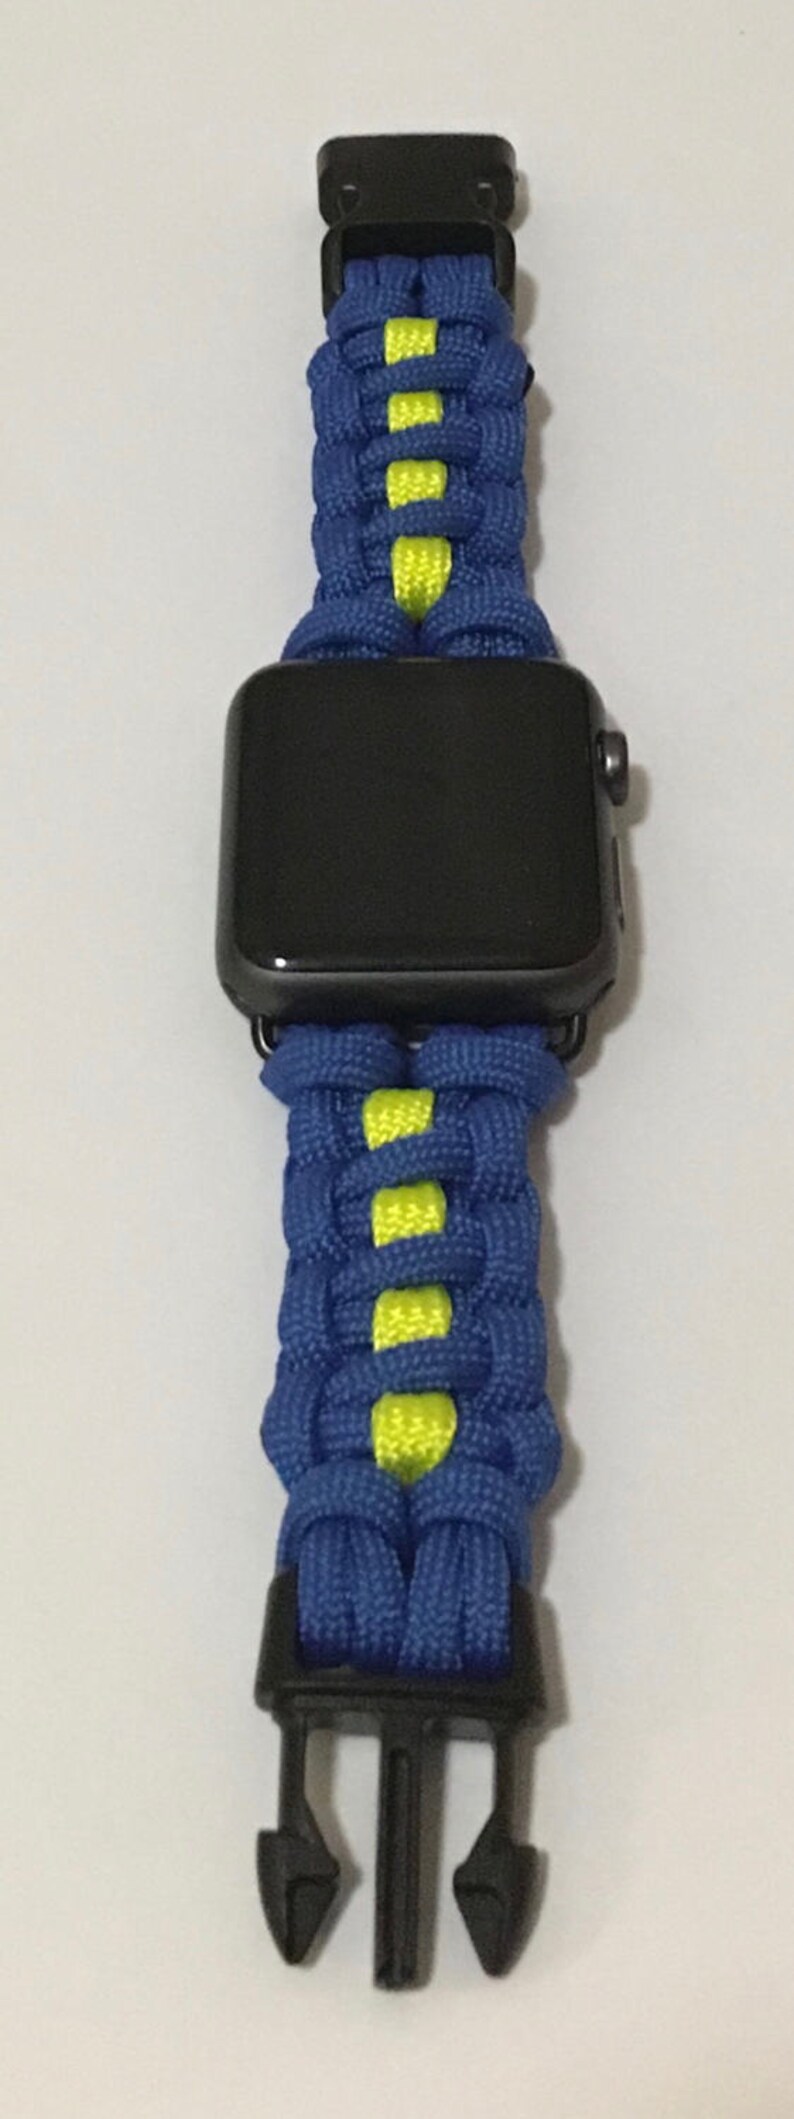 Paracord Apple Watch Band, Cobra Stitch Apple Watch band, Boston Strong, 38mm and 42mm for Series 1,2,3 & 4 image 3